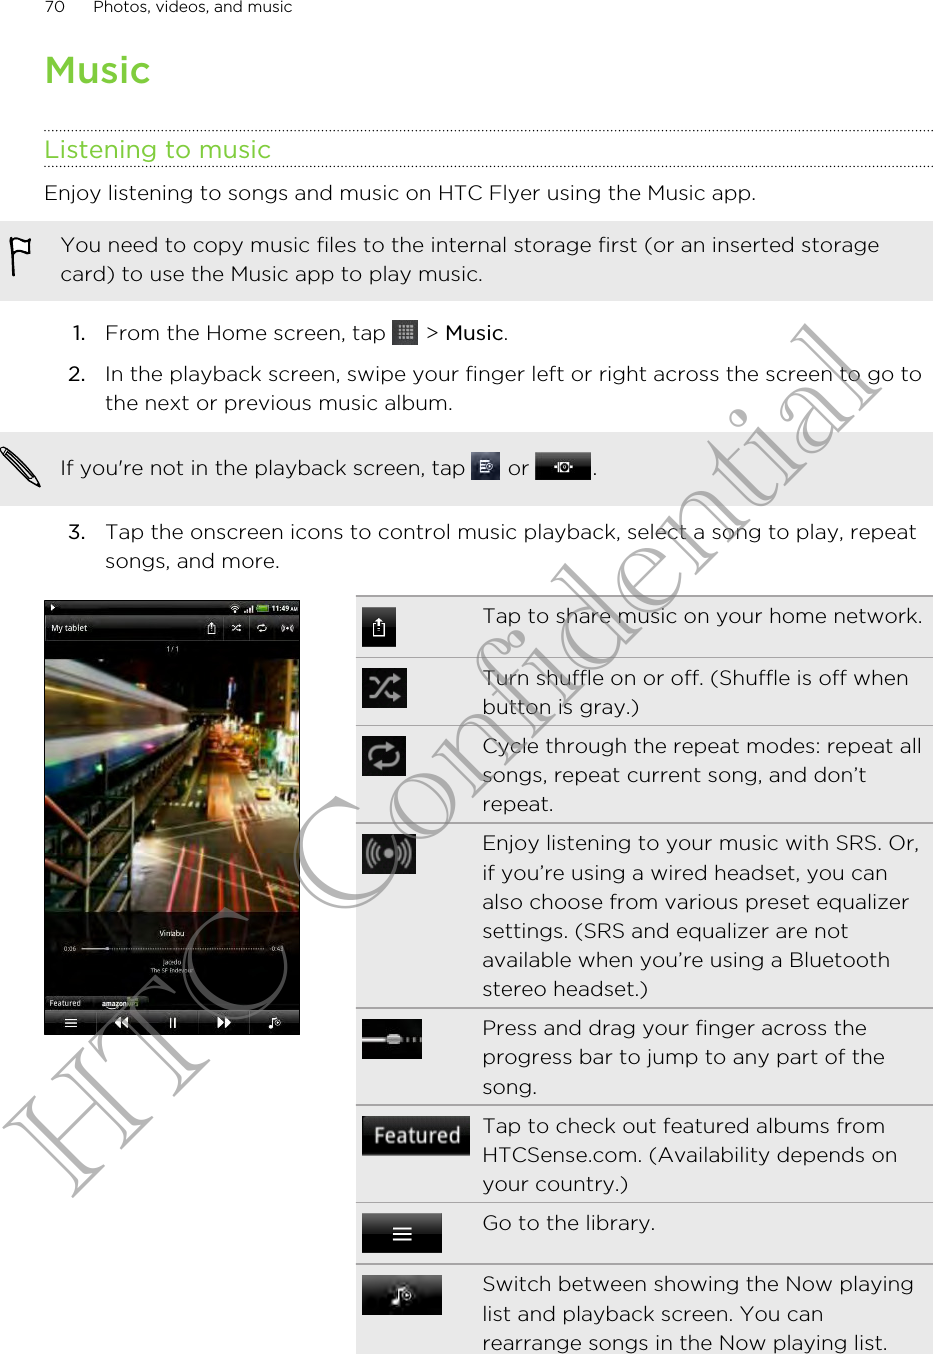 MusicListening to musicEnjoy listening to songs and music on HTC Flyer using the Music app.You need to copy music files to the internal storage first (or an inserted storagecard) to use the Music app to play music.1. From the Home screen, tap   &gt; Music.2. In the playback screen, swipe your finger left or right across the screen to go tothe next or previous music album. If you&apos;re not in the playback screen, tap   or  .3. Tap the onscreen icons to control music playback, select a song to play, repeatsongs, and more.Tap to share music on your home network.Turn shuffle on or off. (Shuffle is off whenbutton is gray.)Cycle through the repeat modes: repeat allsongs, repeat current song, and don’trepeat.Enjoy listening to your music with SRS. Or,if you’re using a wired headset, you canalso choose from various preset equalizersettings. (SRS and equalizer are notavailable when you’re using a Bluetoothstereo headset.)Press and drag your finger across theprogress bar to jump to any part of thesong.Tap to check out featured albums fromHTCSense.com. (Availability depends onyour country.)Go to the library.Switch between showing the Now playinglist and playback screen. You canrearrange songs in the Now playing list.70 Photos, videos, and musicHTC Confidential